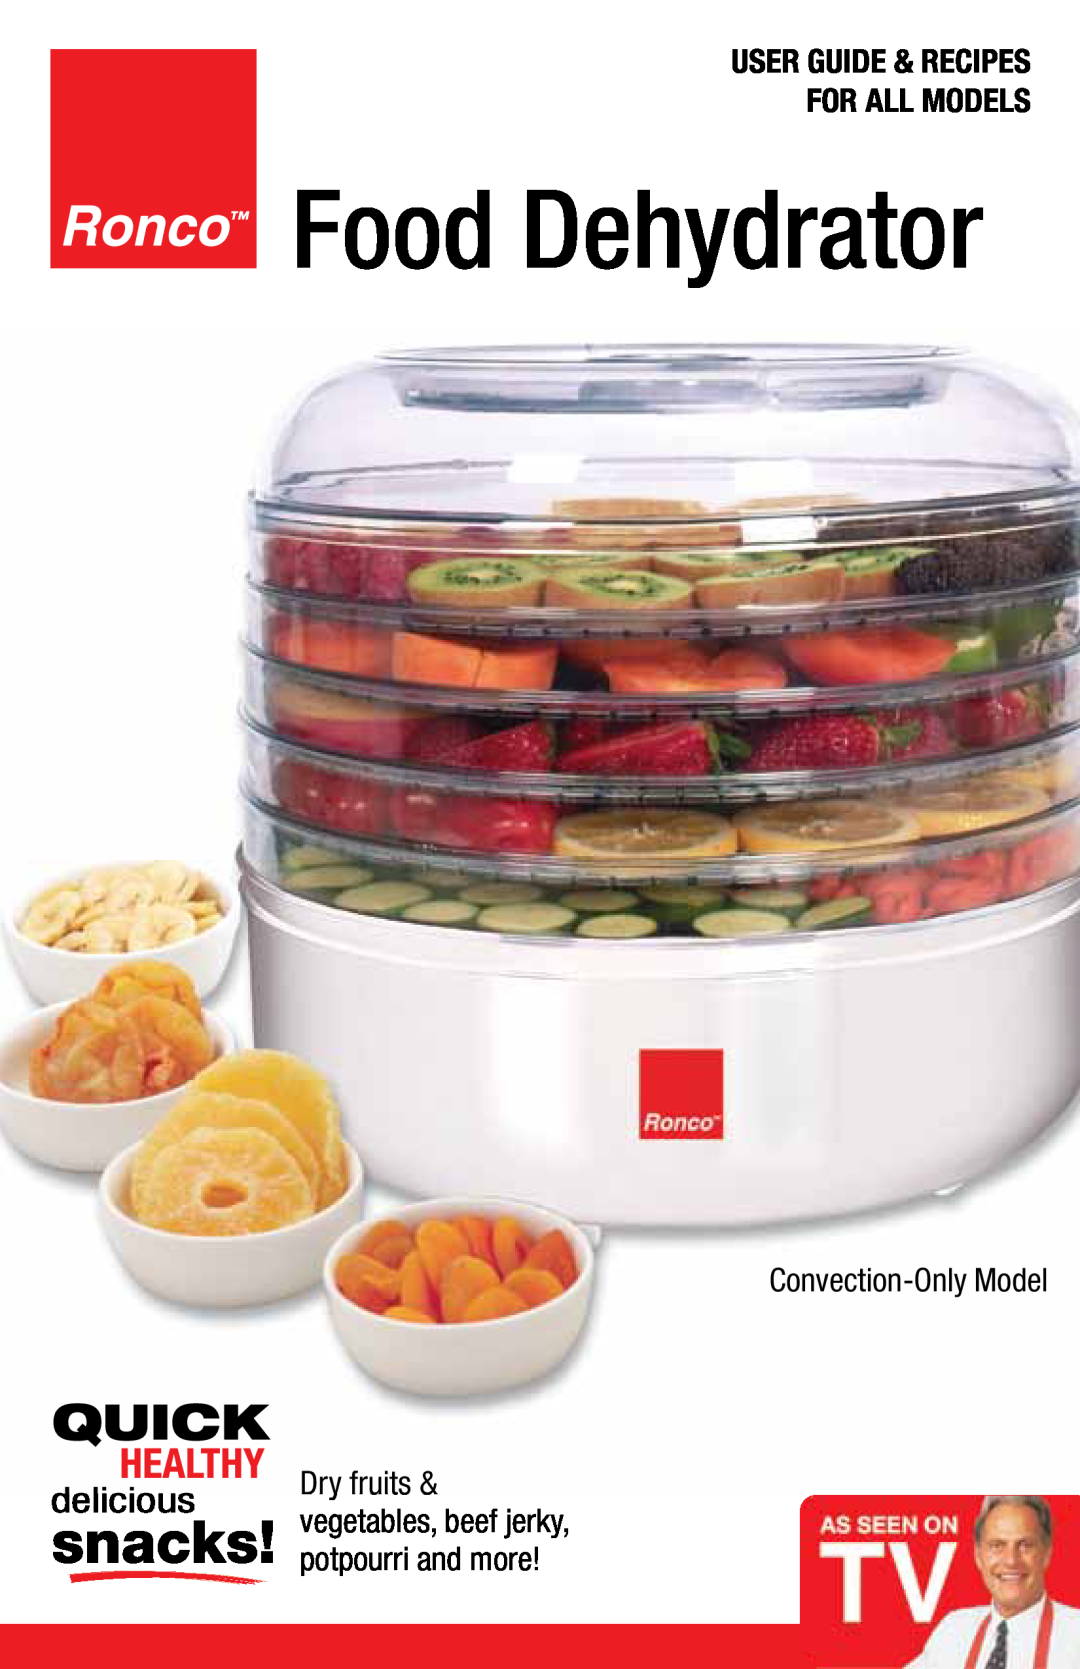 Ronco Food Saver manual USER GUIDE & RECIPES For all Models, Food Dehydrator, Convection-Only Model 